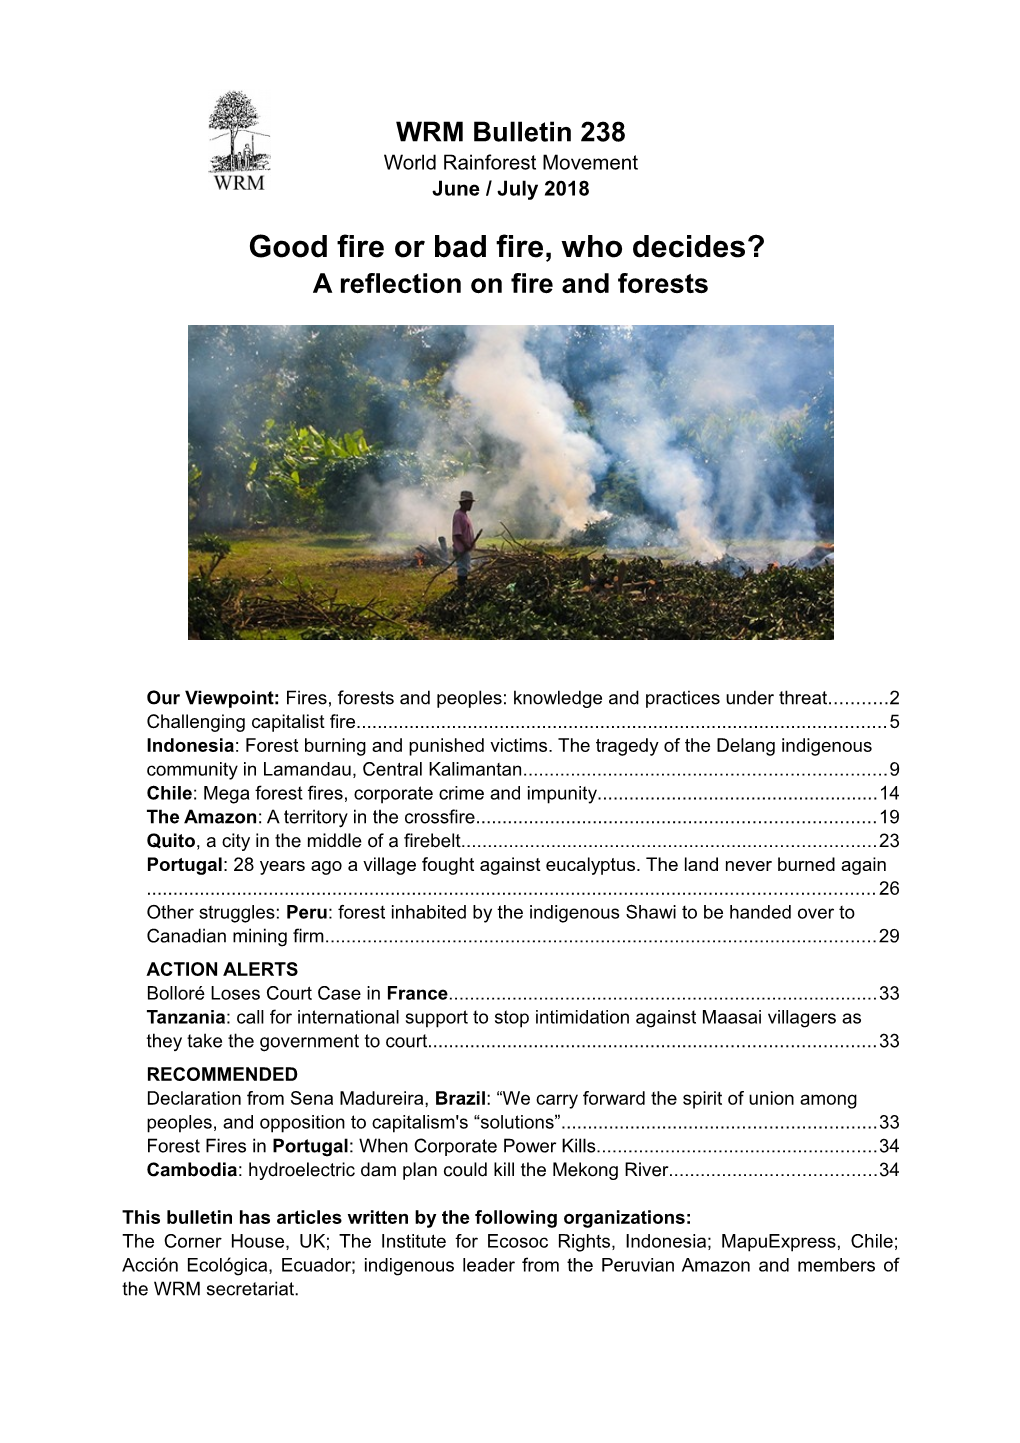 Good Fire Or Bad Fire, Who Decides? a Reflection on Fire and Forests